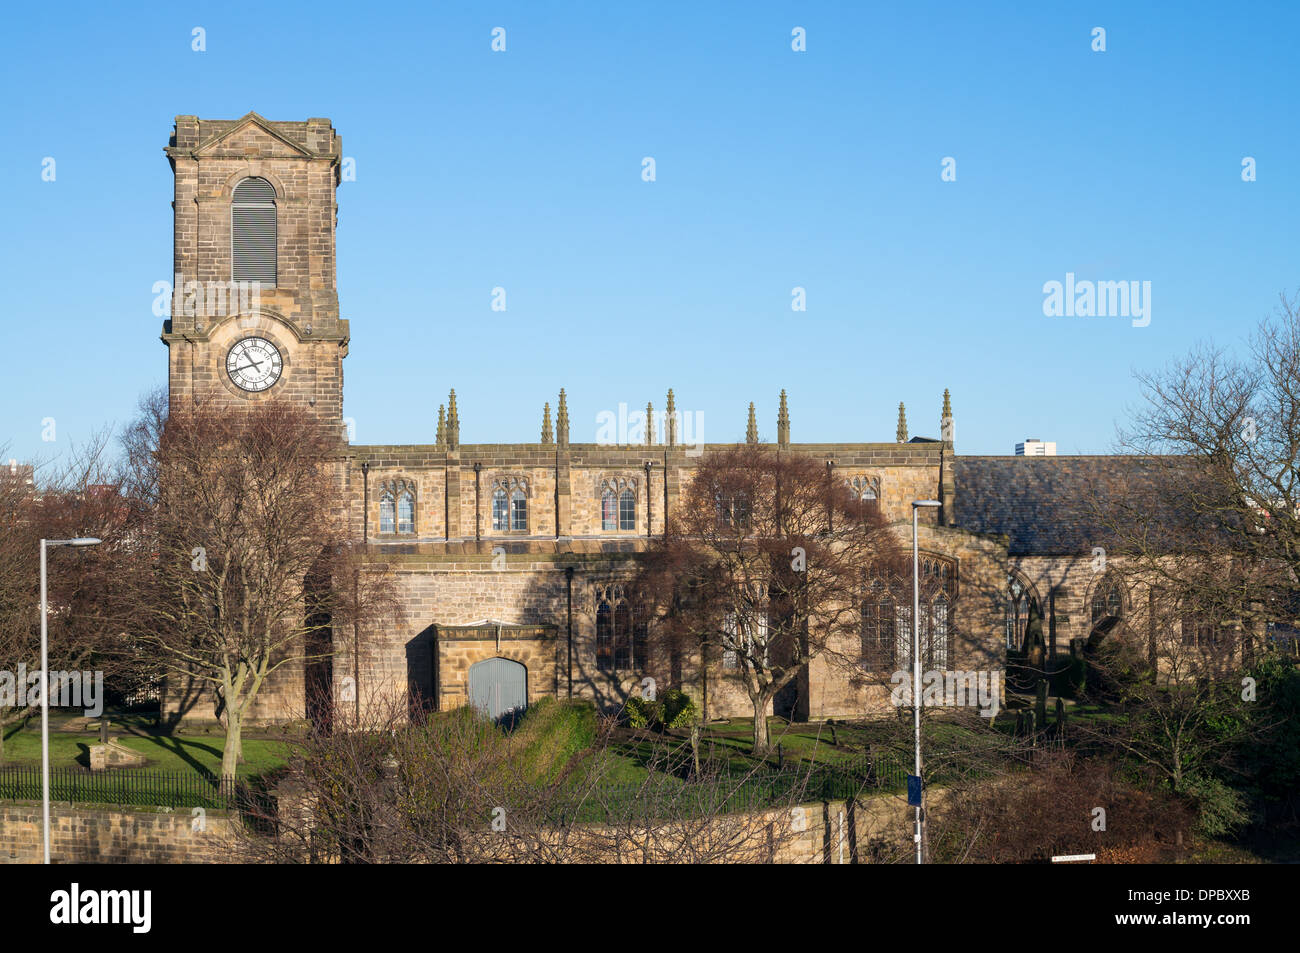 St Mary's church, now Gateshead heritage or visitor centre, north east England UK Stock Photo